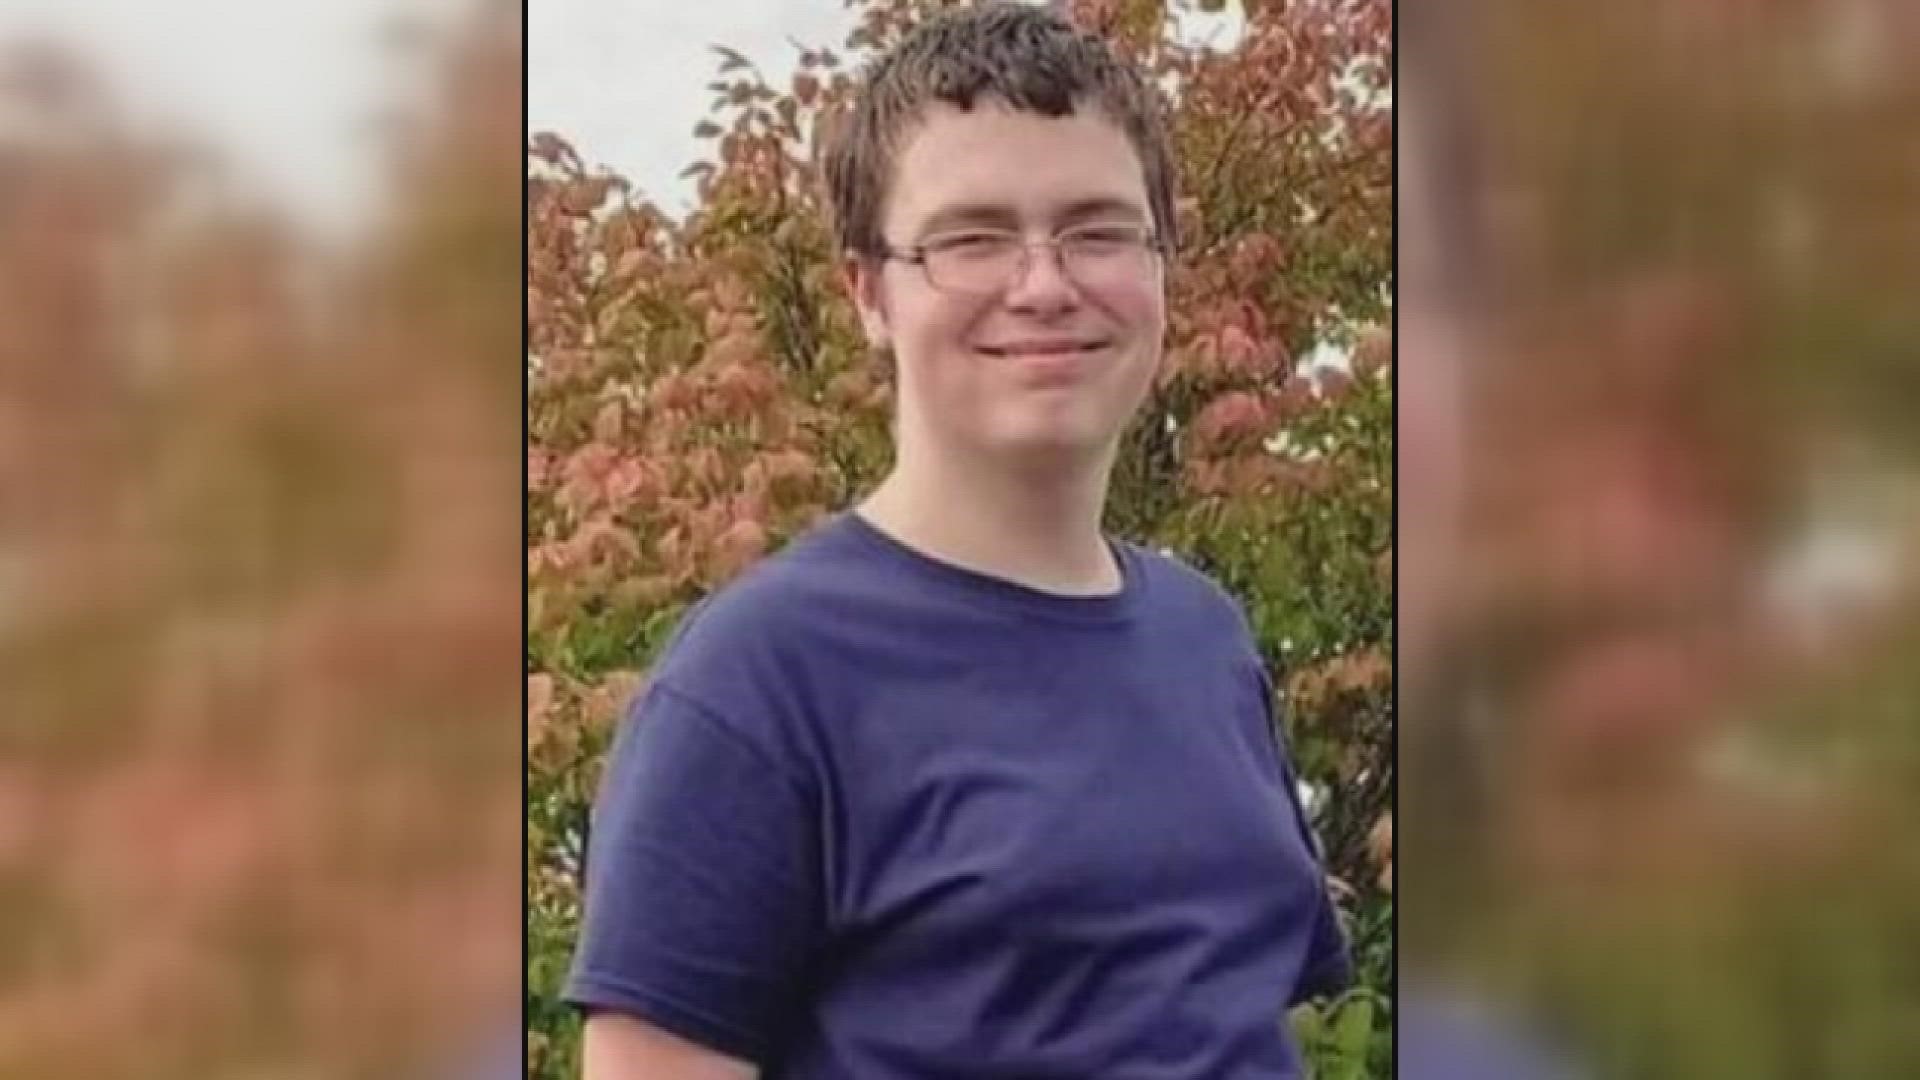 After months of investigation by health agencies, no link has been found between the death of 13-year-old Jacob Clynick and Pfizer's COVID-19 vaccine.